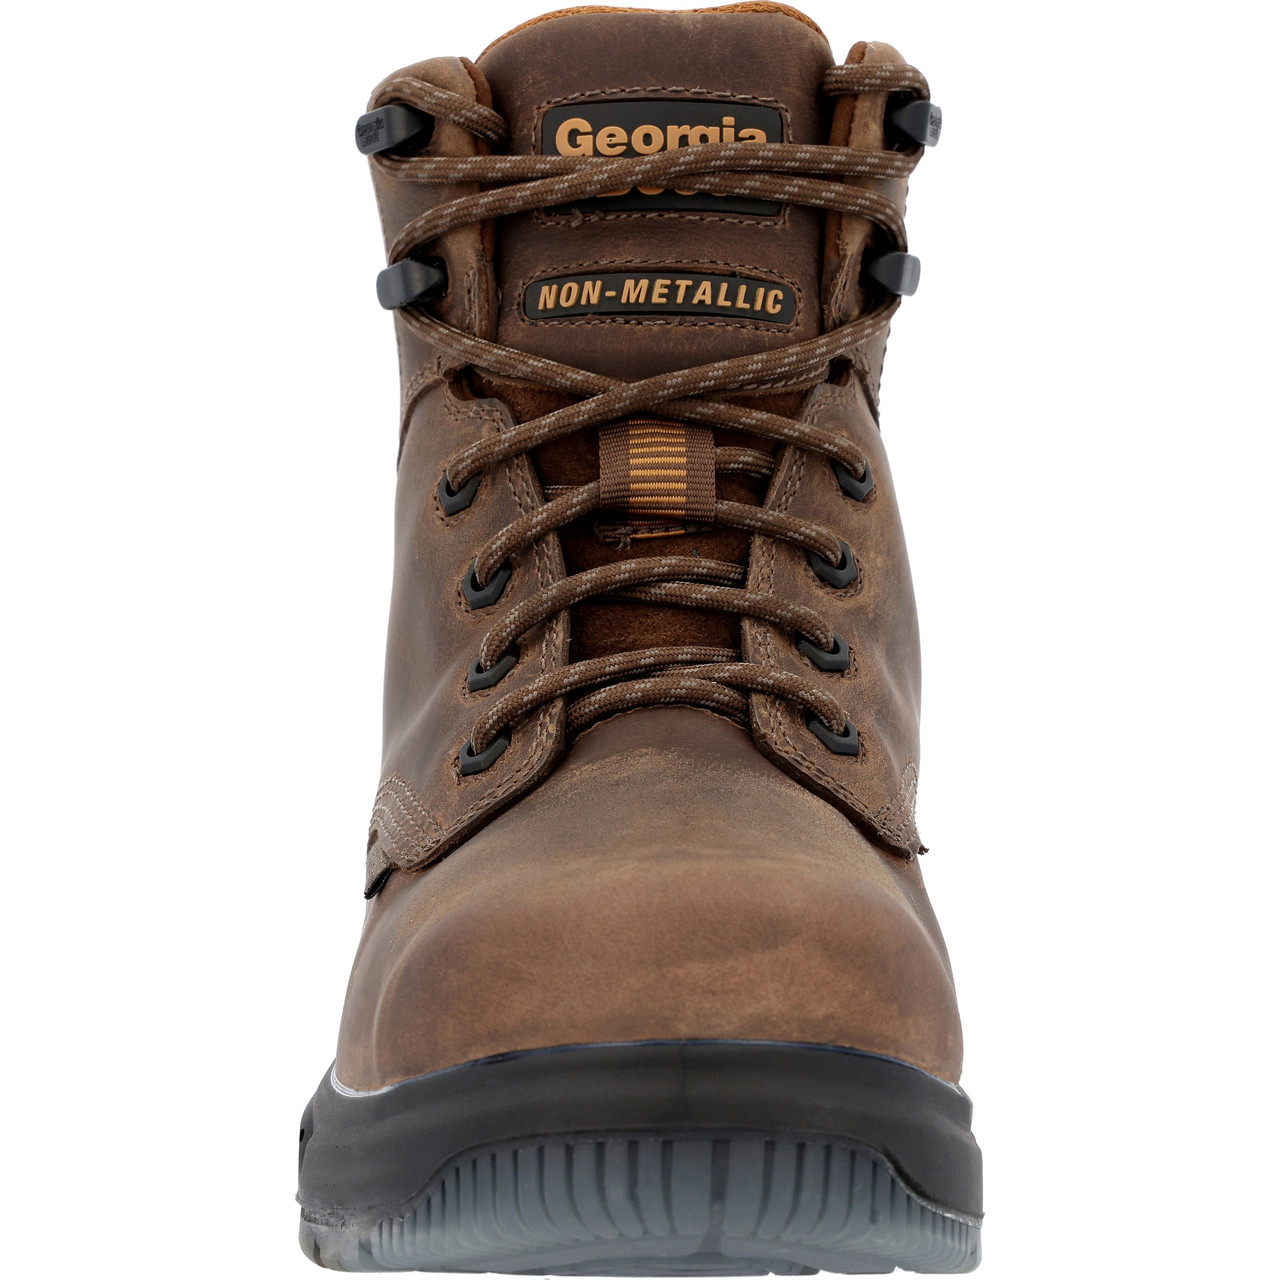 GEORGIA BOOT FLXPOINT ULTRA WATERPROOF WORK BOOTS GB00551 